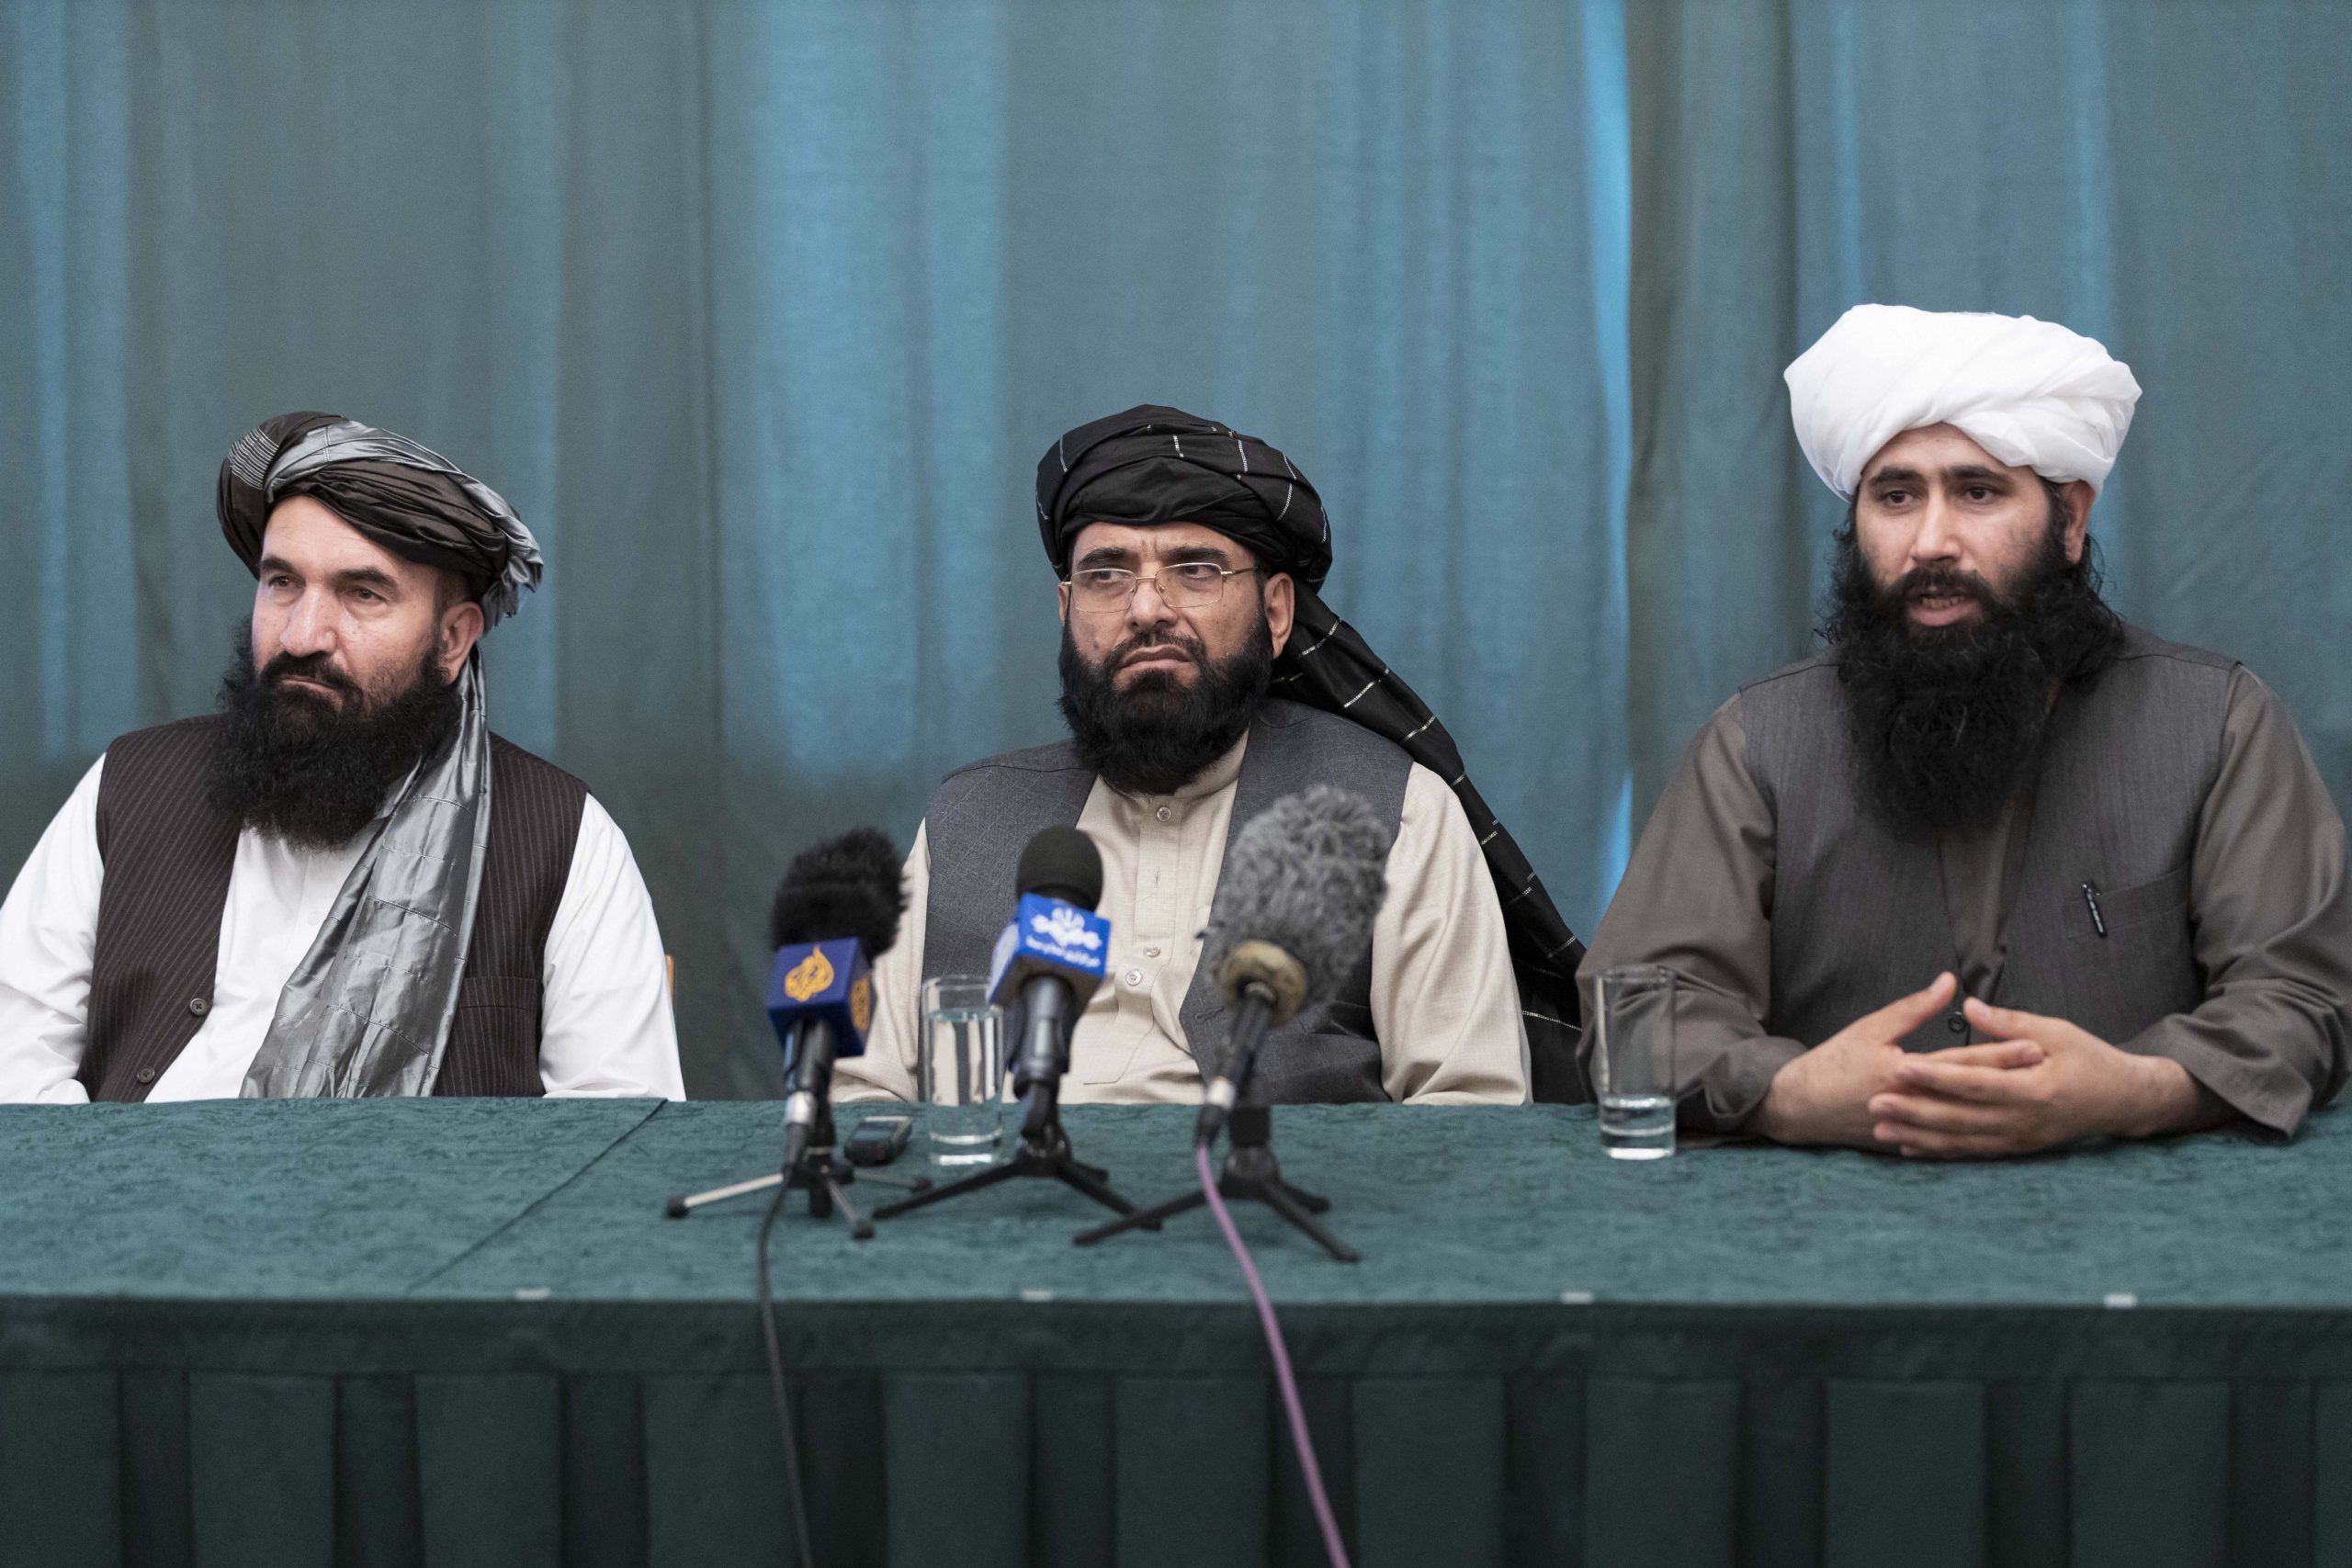 Taliban wants political settlement to Afghan conflict as violence mounts